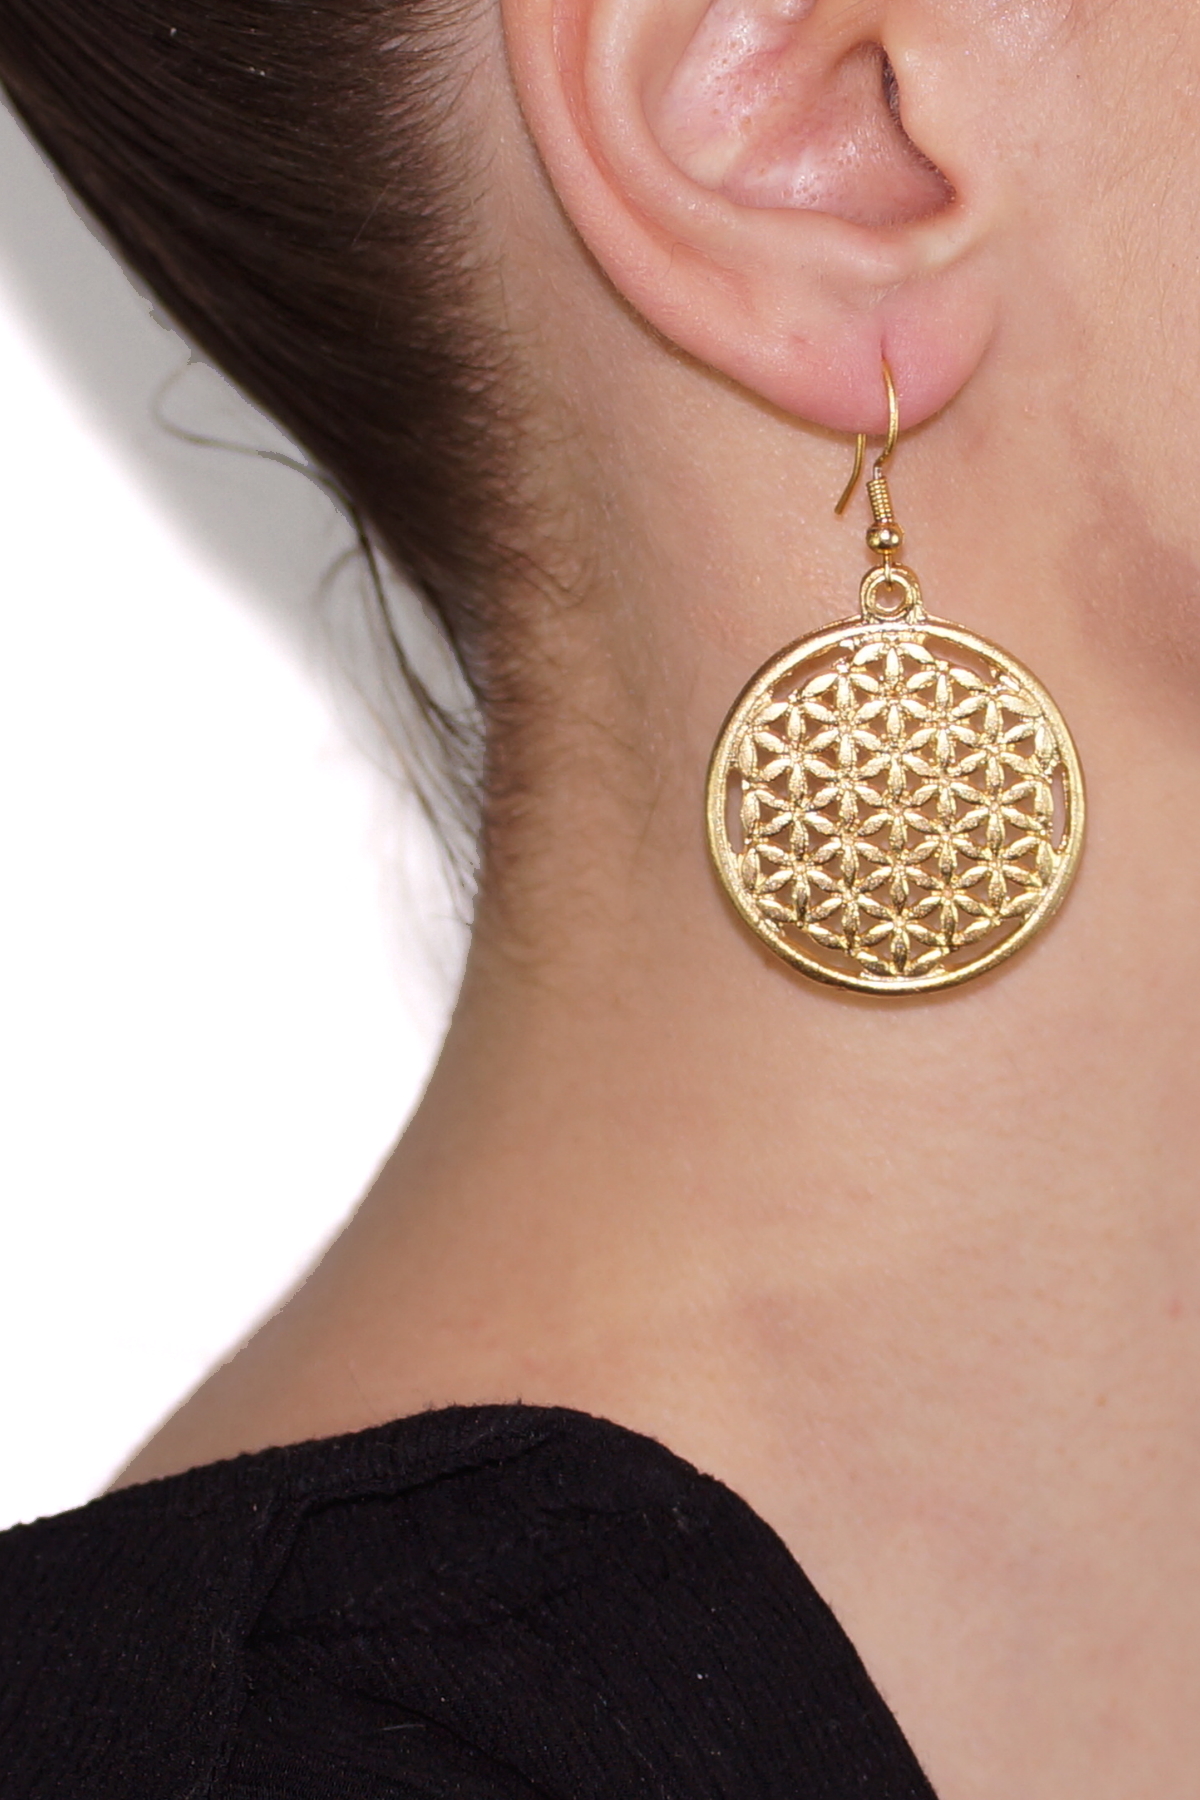 Gold Plated Flower of Life Symbol Earrings